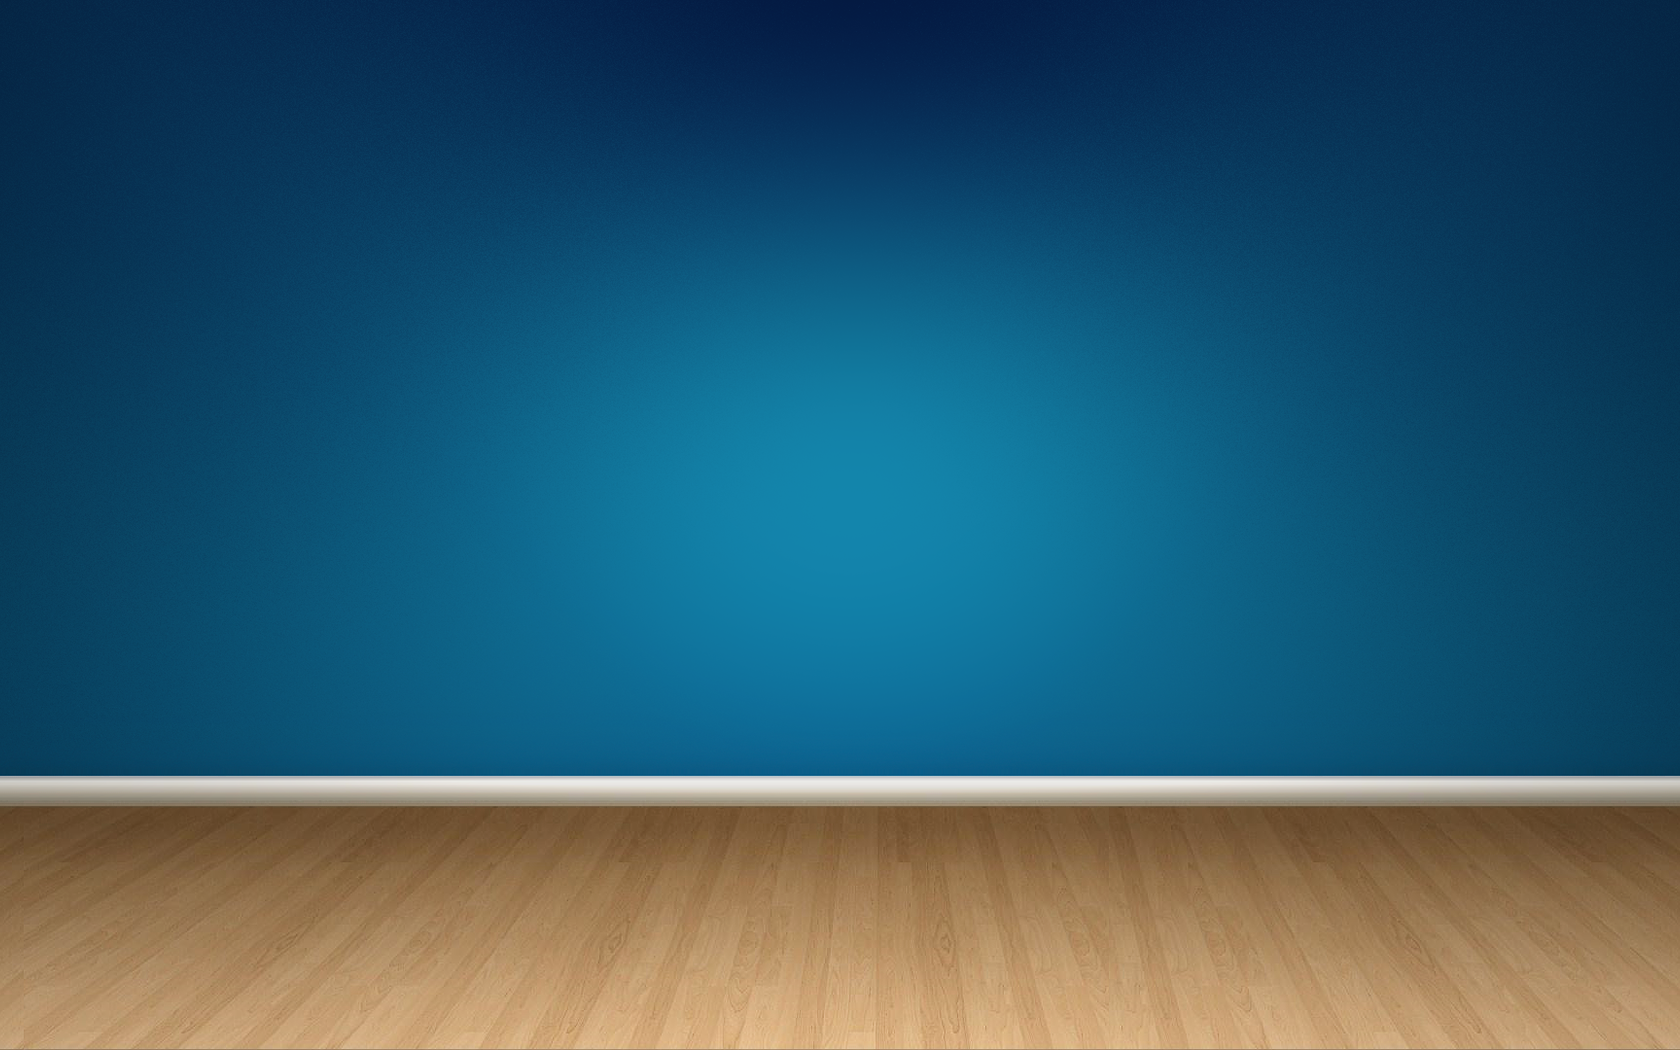 Blue Wall And Wood Floor Wallpaper